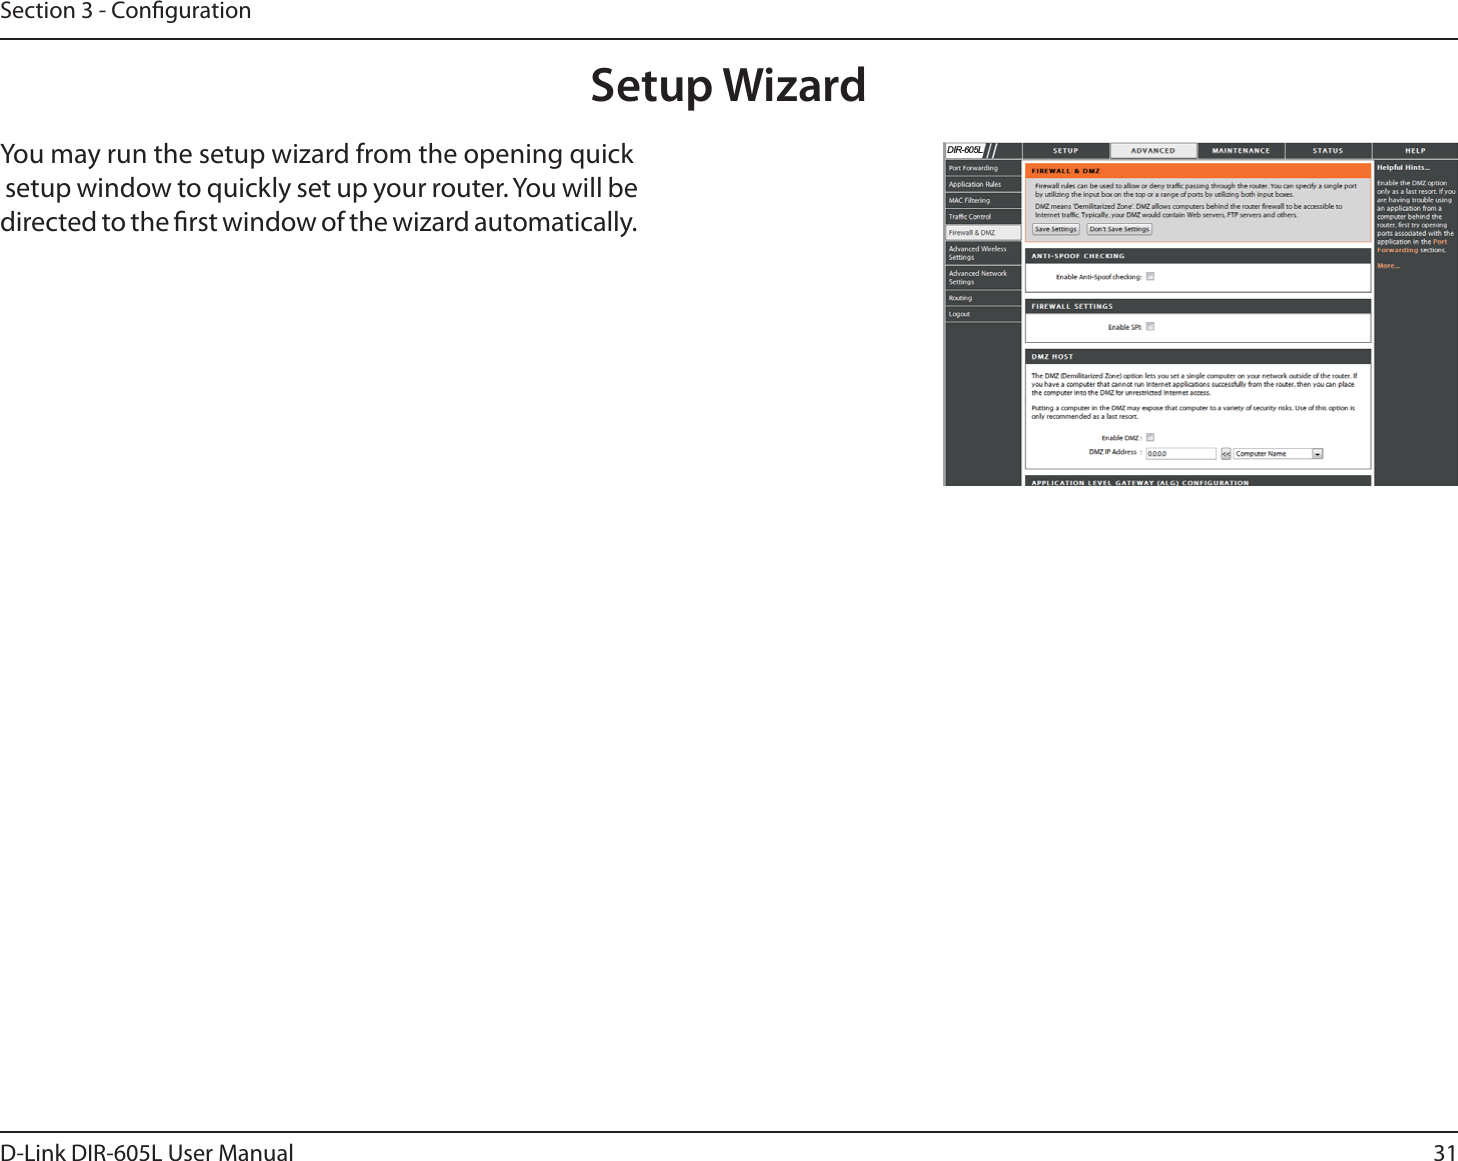 31D-Link DIR-605L User ManualSection 3 - CongurationSetup WizardYou may run the setup wizard from the opening quick setup window to quickly set up your router. You will be directed to the rst window of the wizard automatically.&apos;,5/